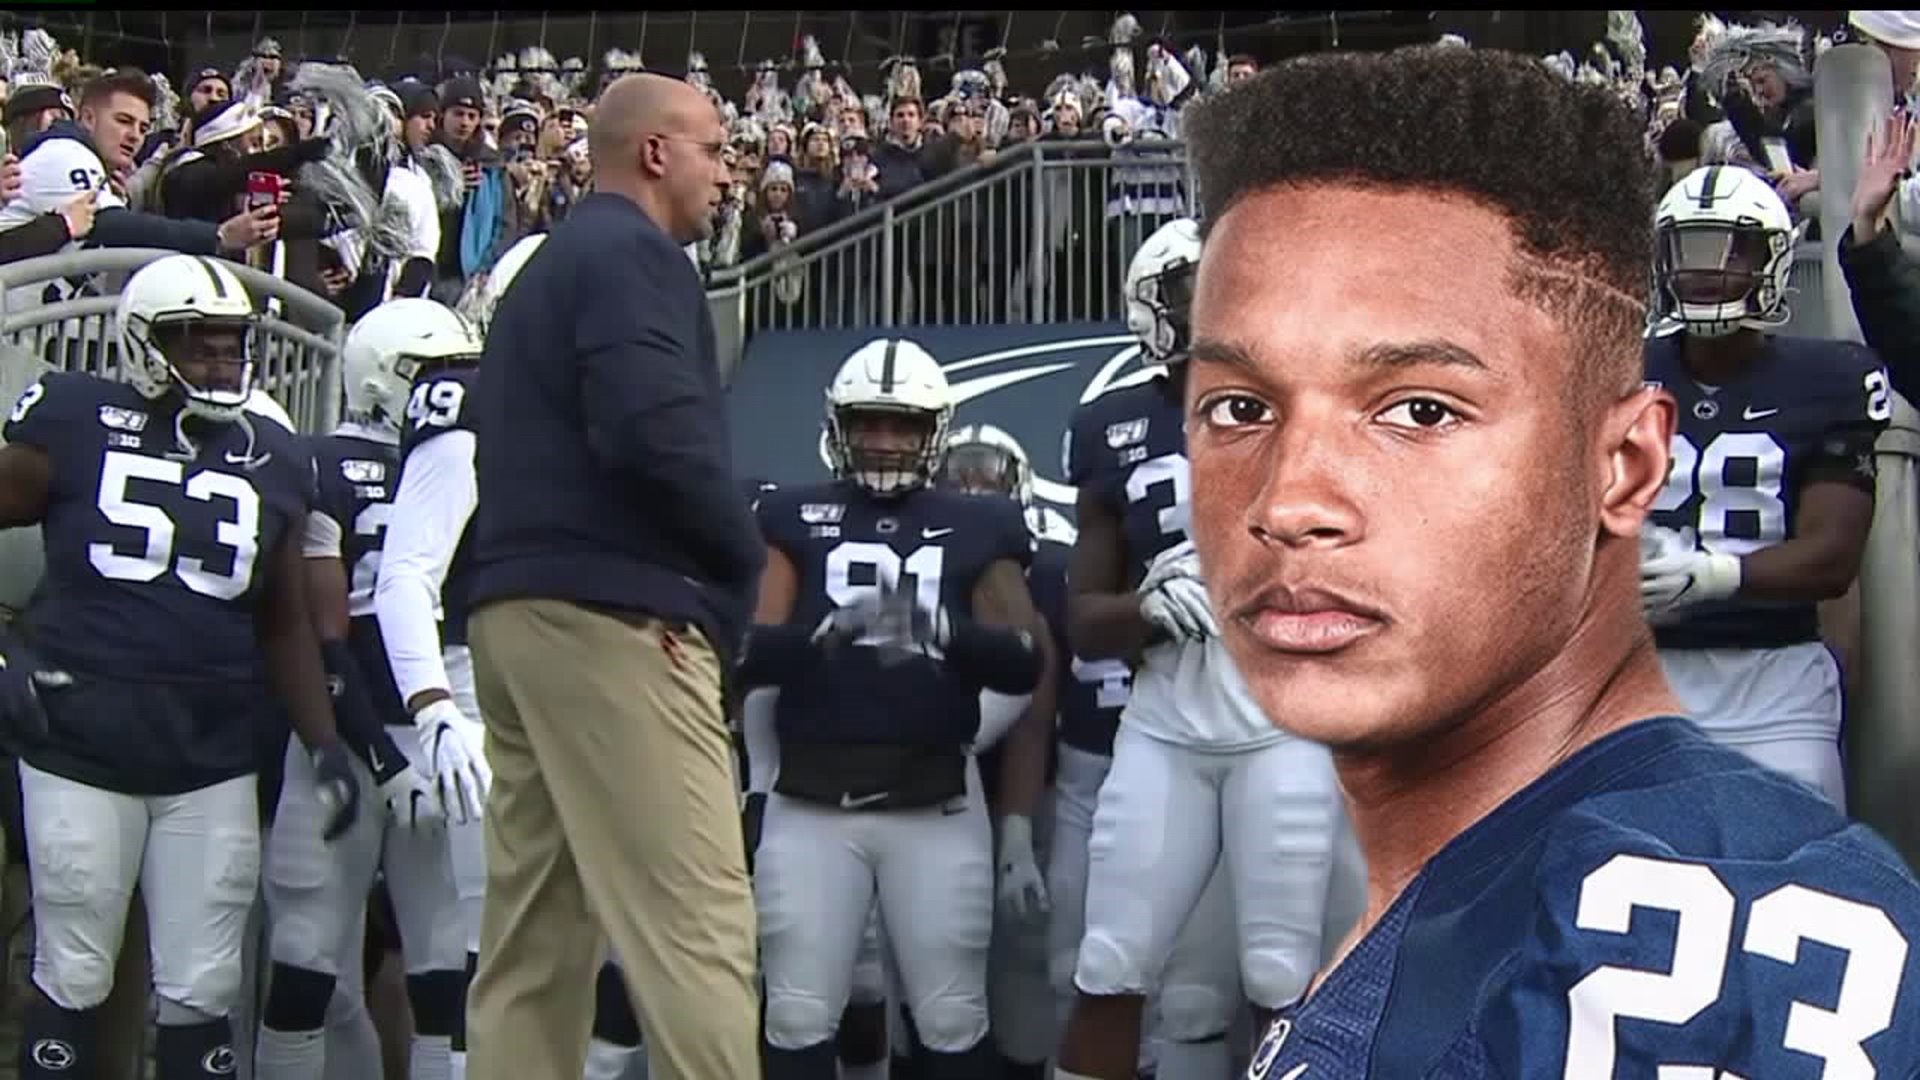 Former Penn State football player files a lawsuit